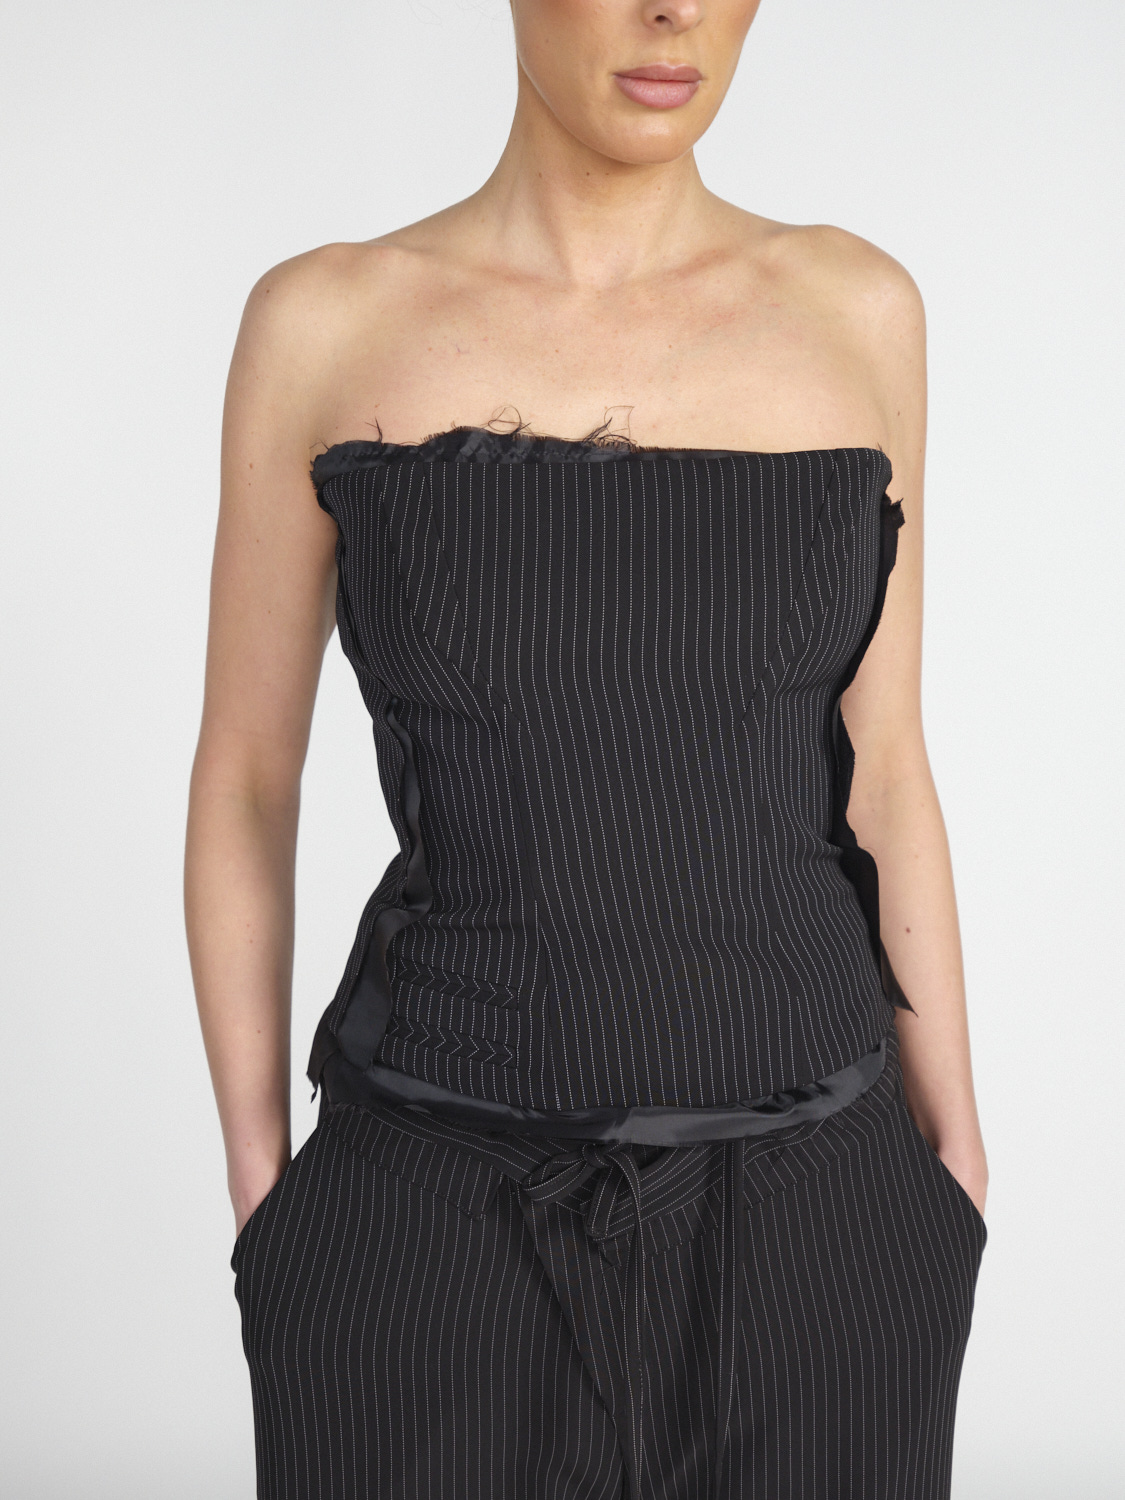 Suit – Corset top with pinstripe pattern 